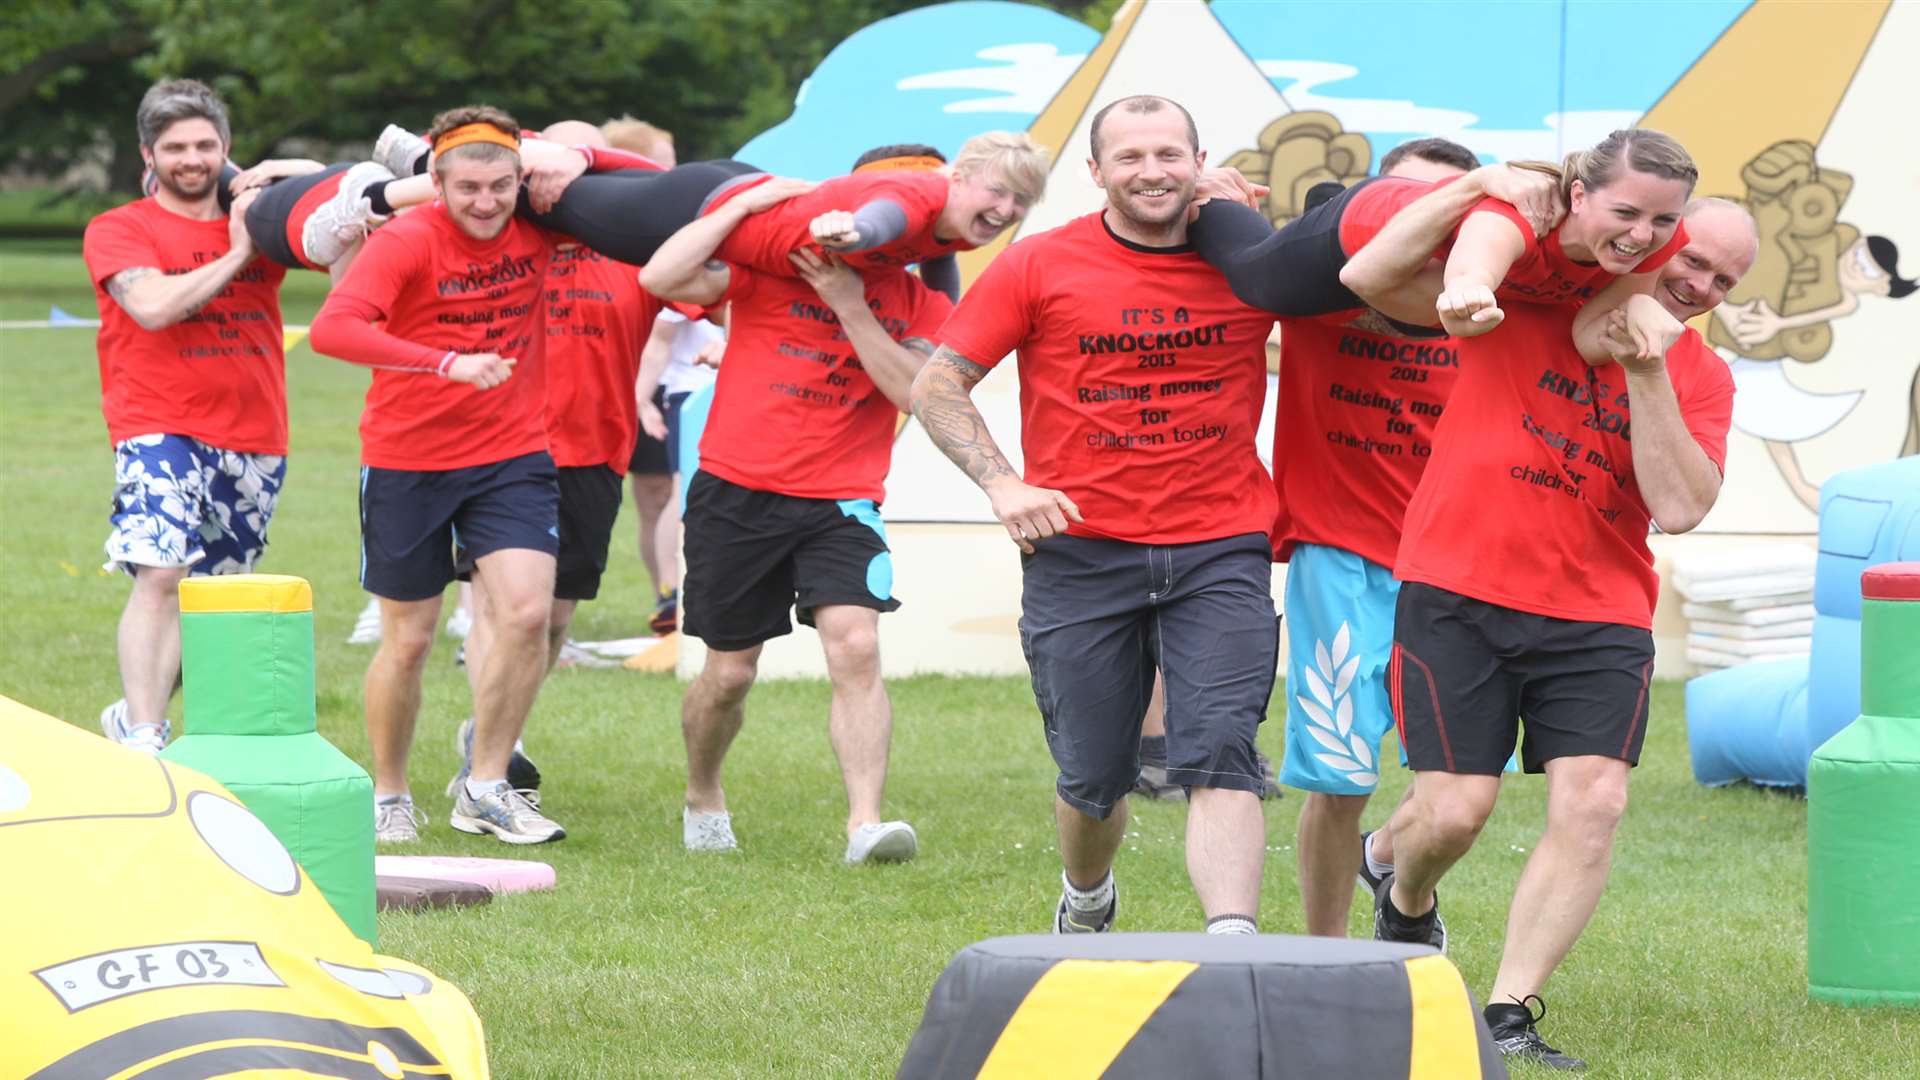 The annual event raises funds for the Heart of Kent Hospice